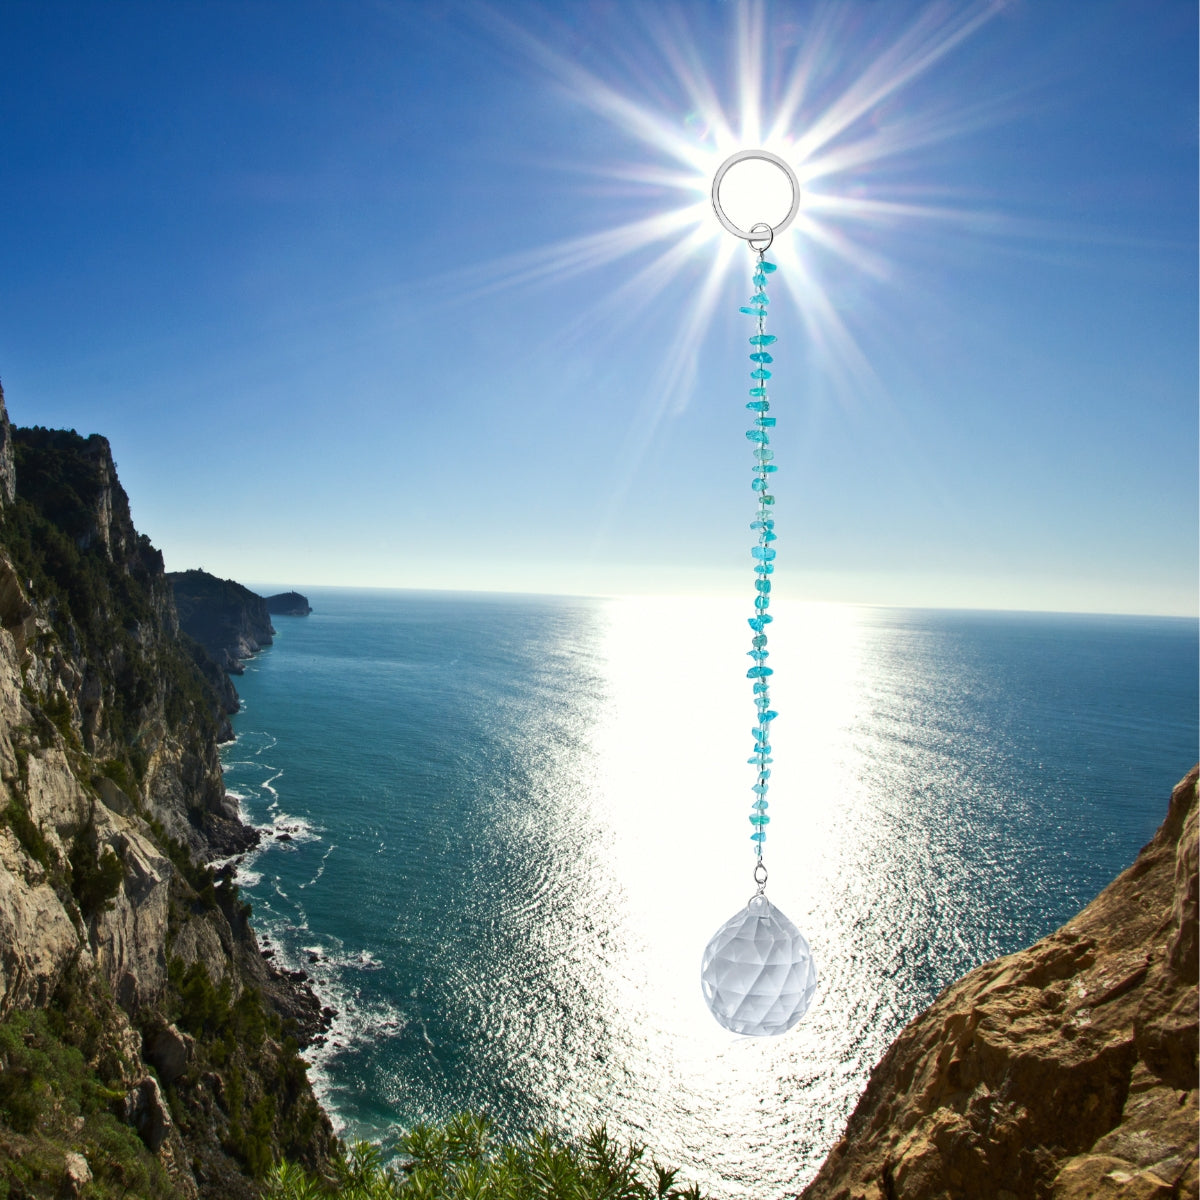  Use this Crystal Sun Catcher - Rainbow Maker as a keychain, a window decor or hang it on the rear view mirror in your car and enjoy the positivity the light brings to you.